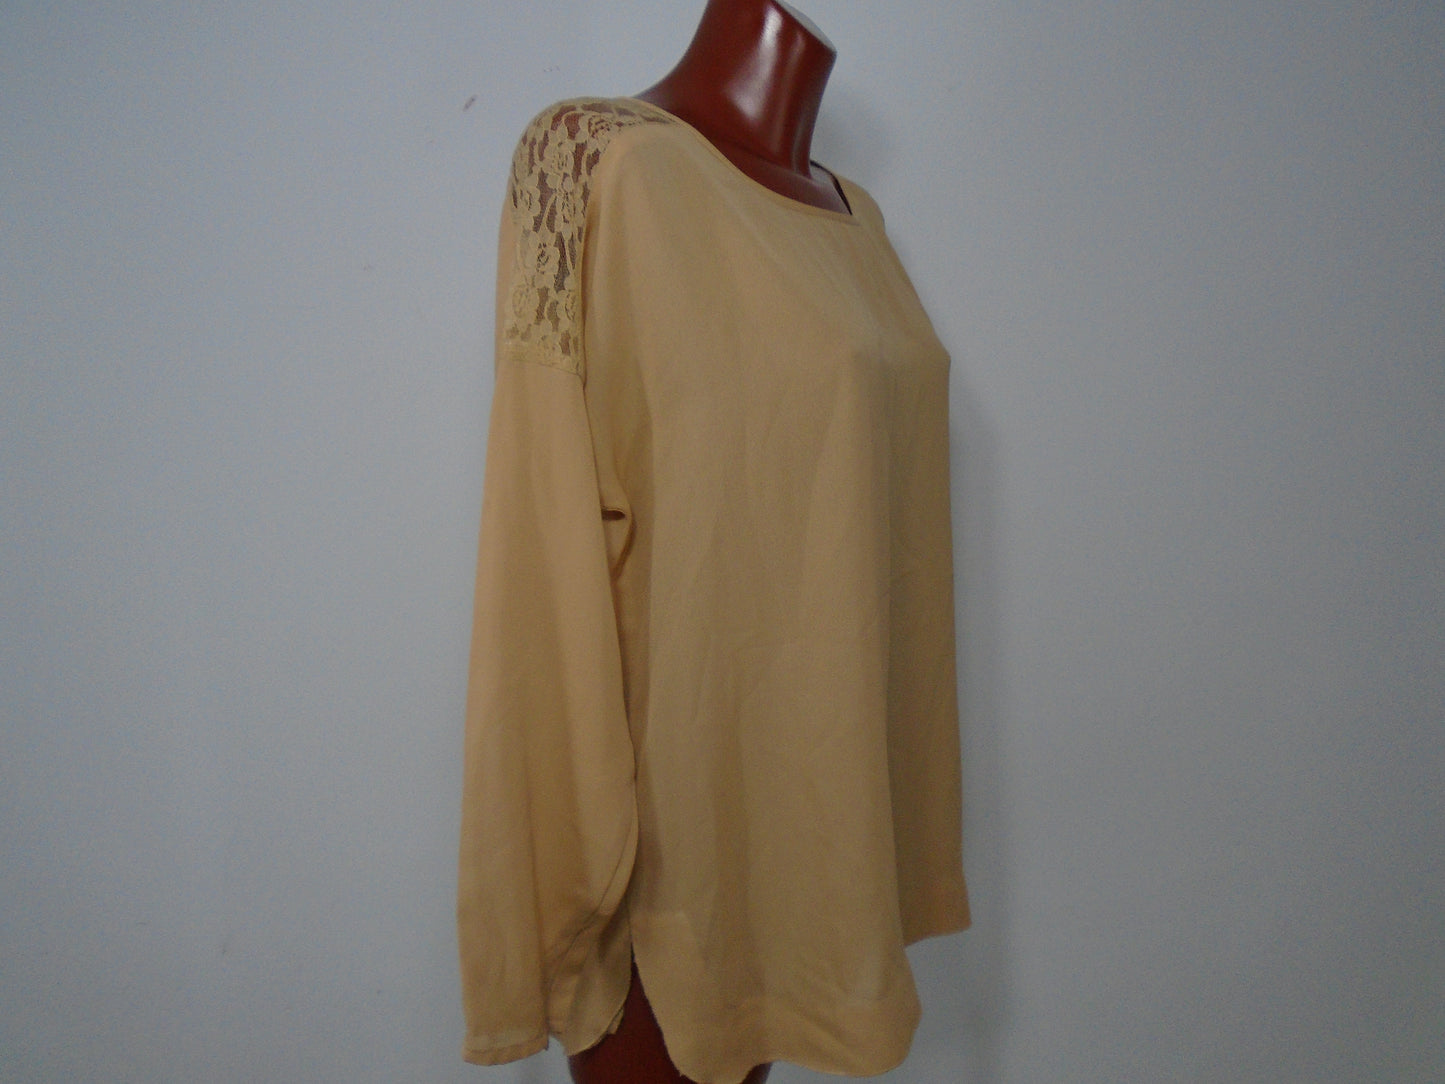 Blusa Mujer Urban Outfitters. Beige. SG. Usó. Muy buena condicion